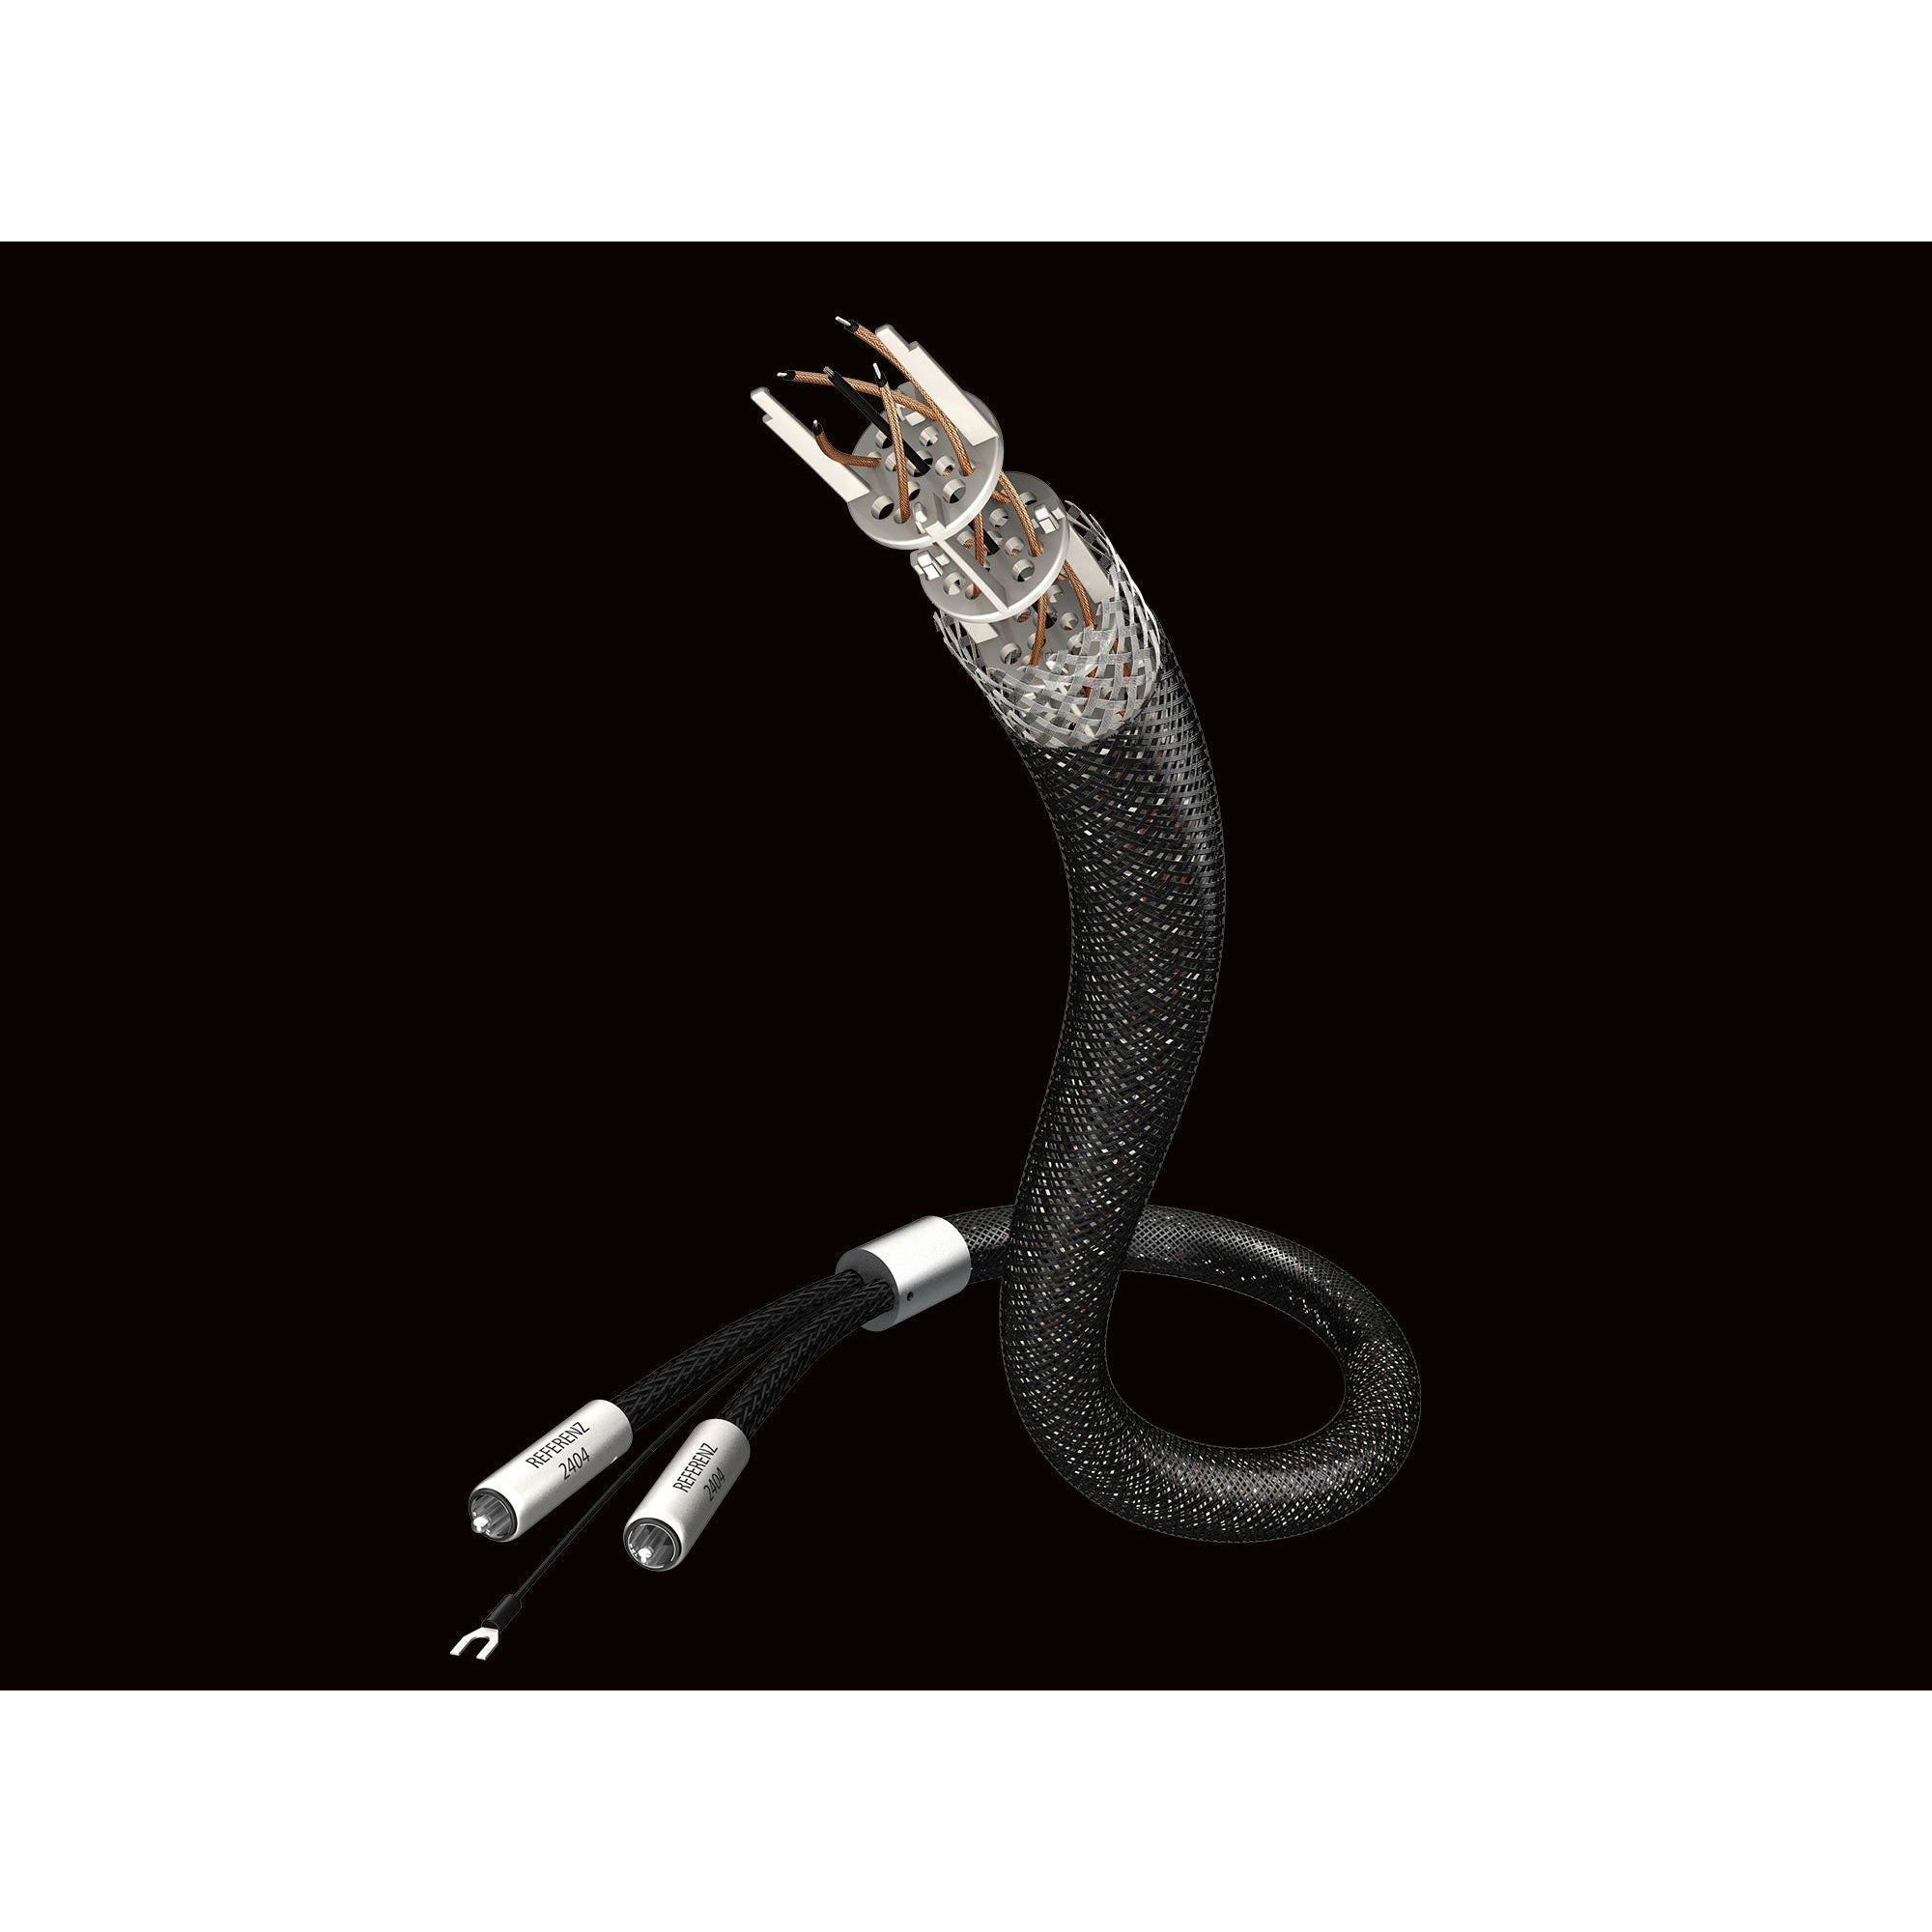 Inakustik - Referenz Phono NF-2404 AIR SME90⁰ Turntable Interconnect Cable Australia